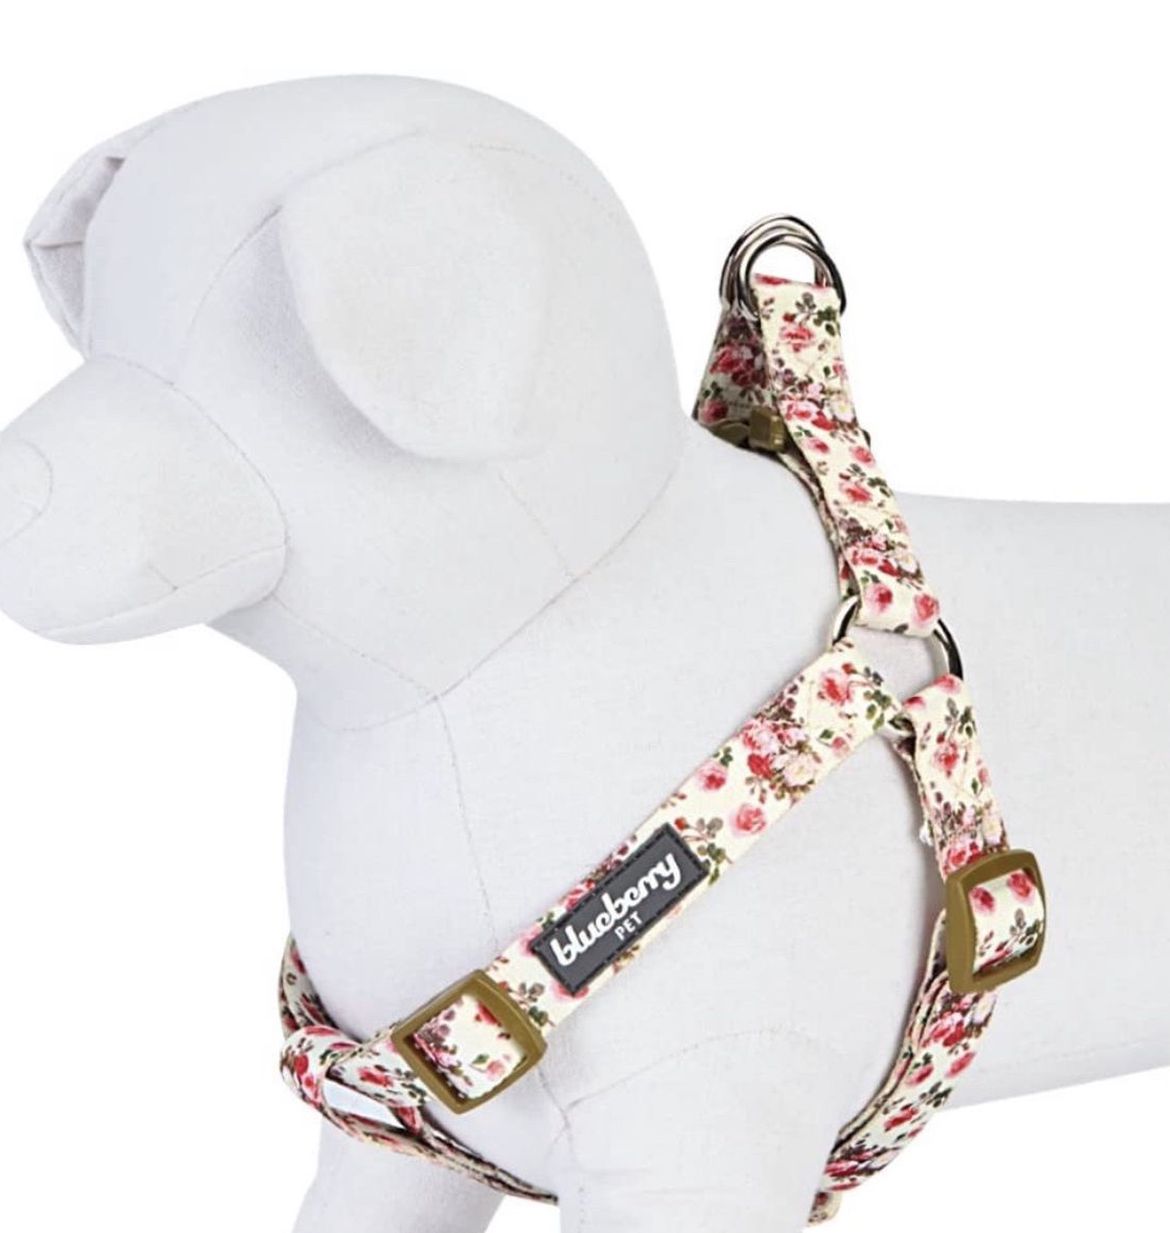 Blueberry Pet Dog Harness Brand New, Small